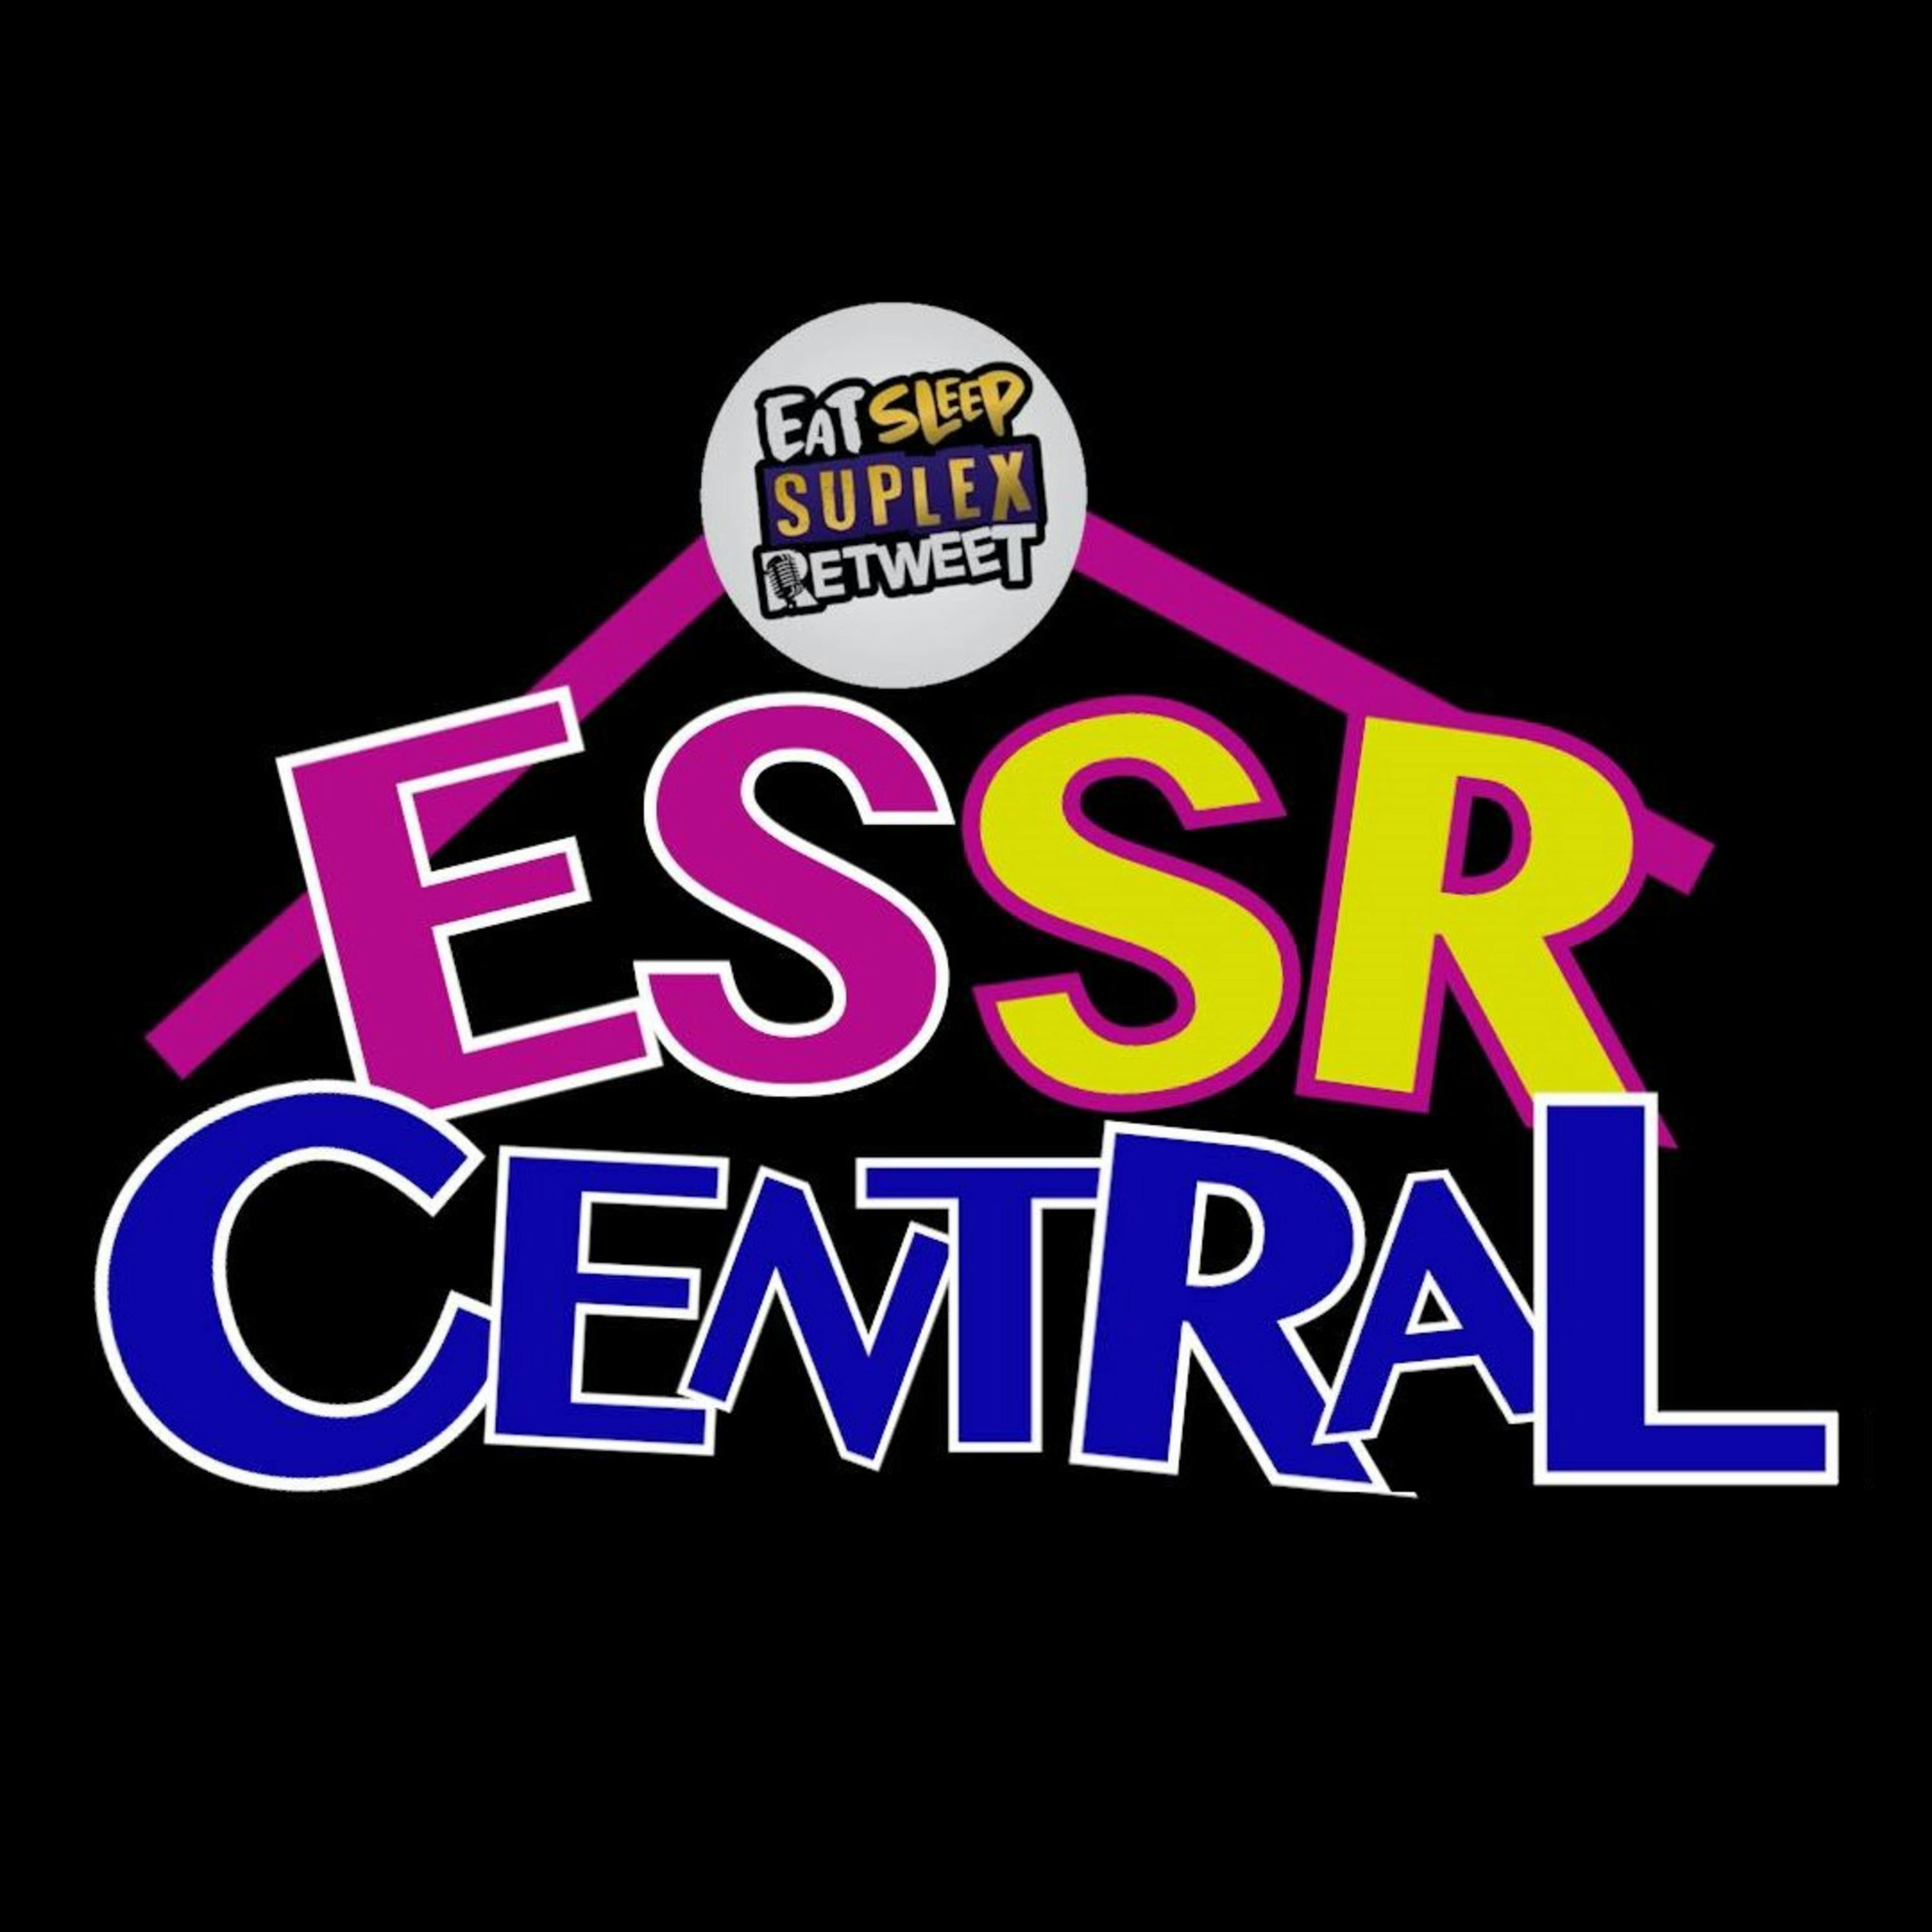 ESSR Central #024 - NXT TakeOver, The Forbidden Door and WWE’s signing spree